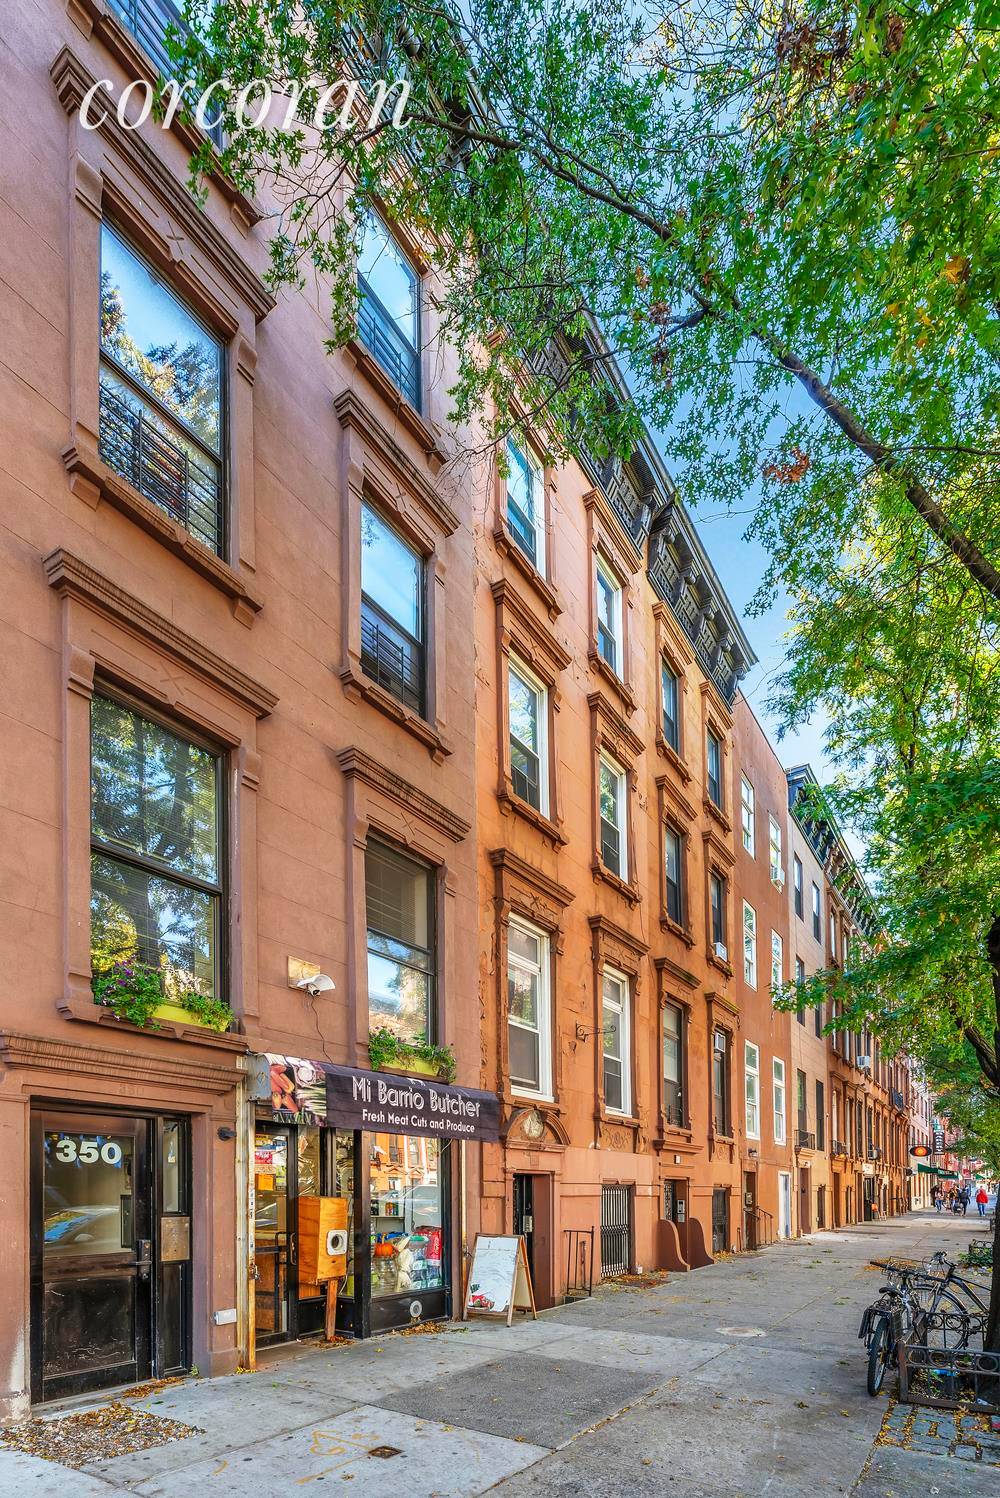 350 East 116th Street is a four story brownstone.